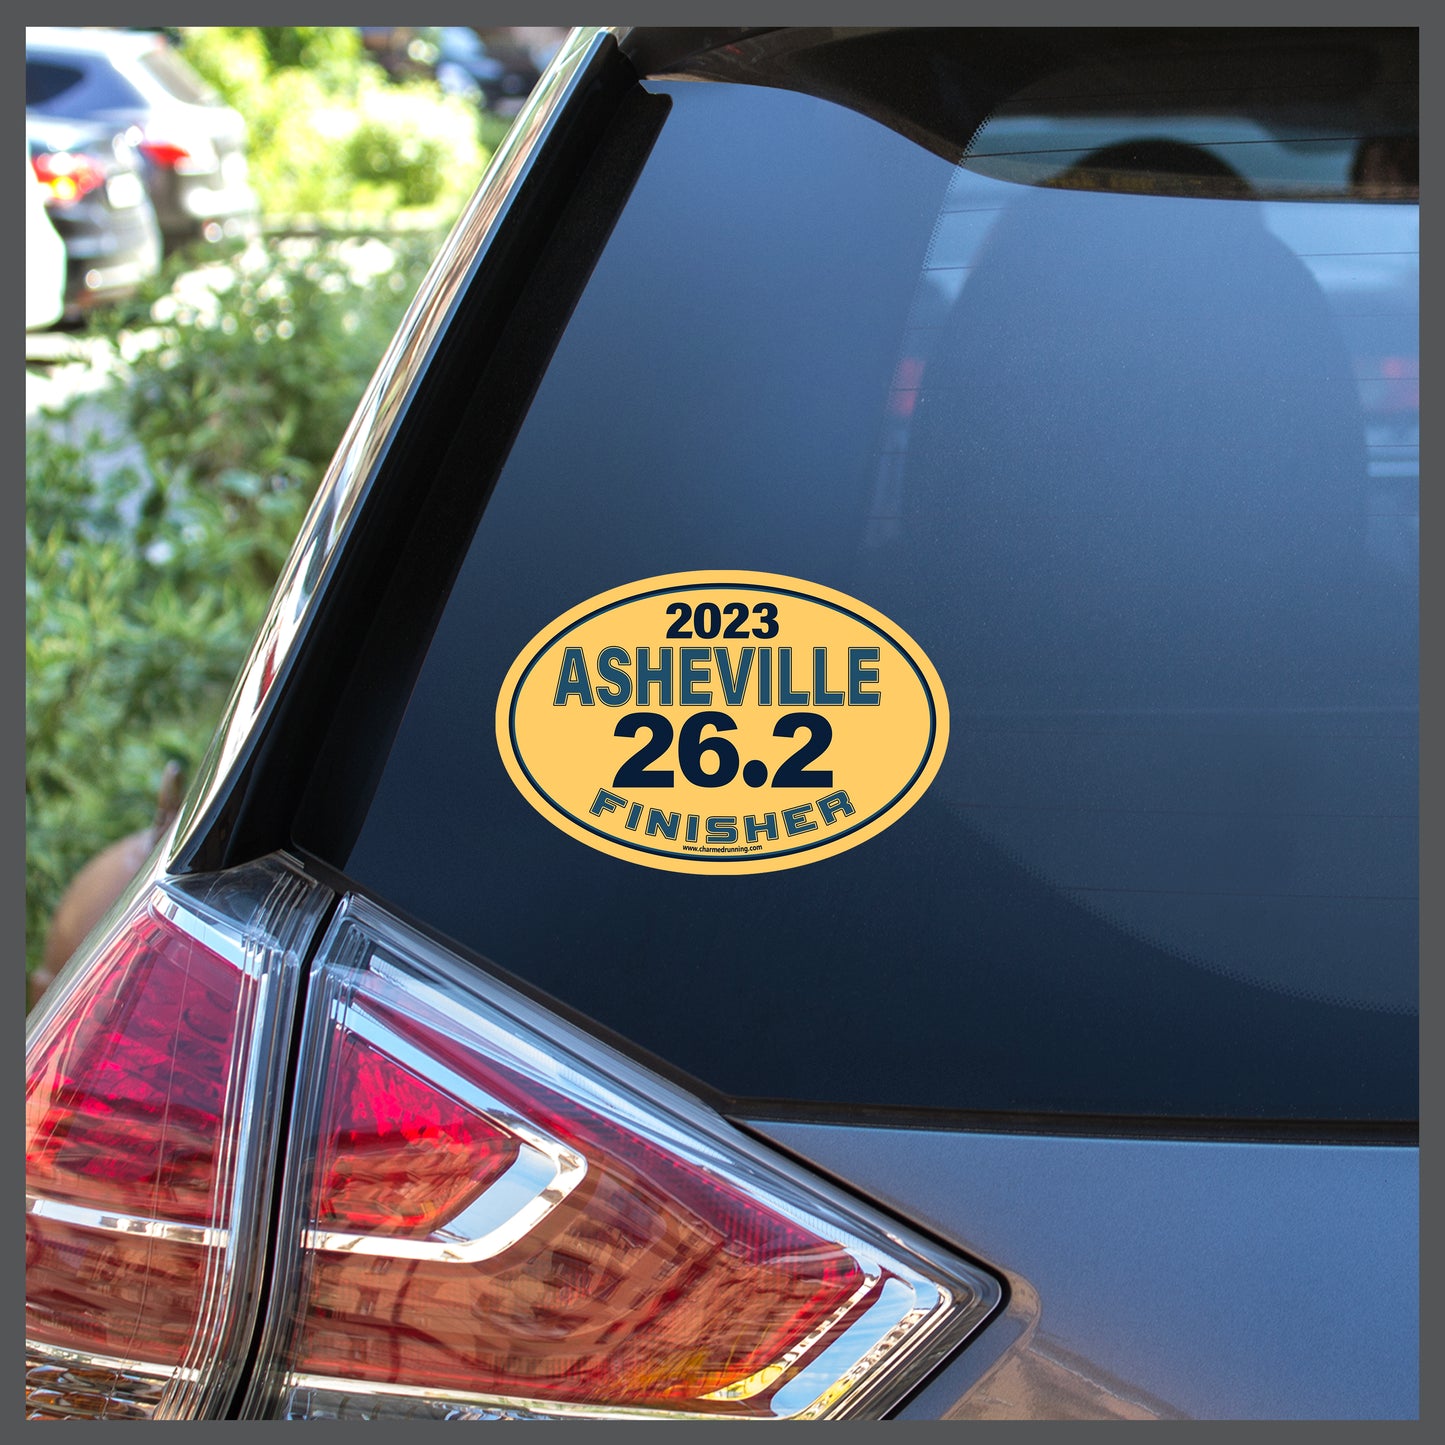 Asheville 26.2 Marathon FINISHER Decal or Car Magnet with Custom Year Option